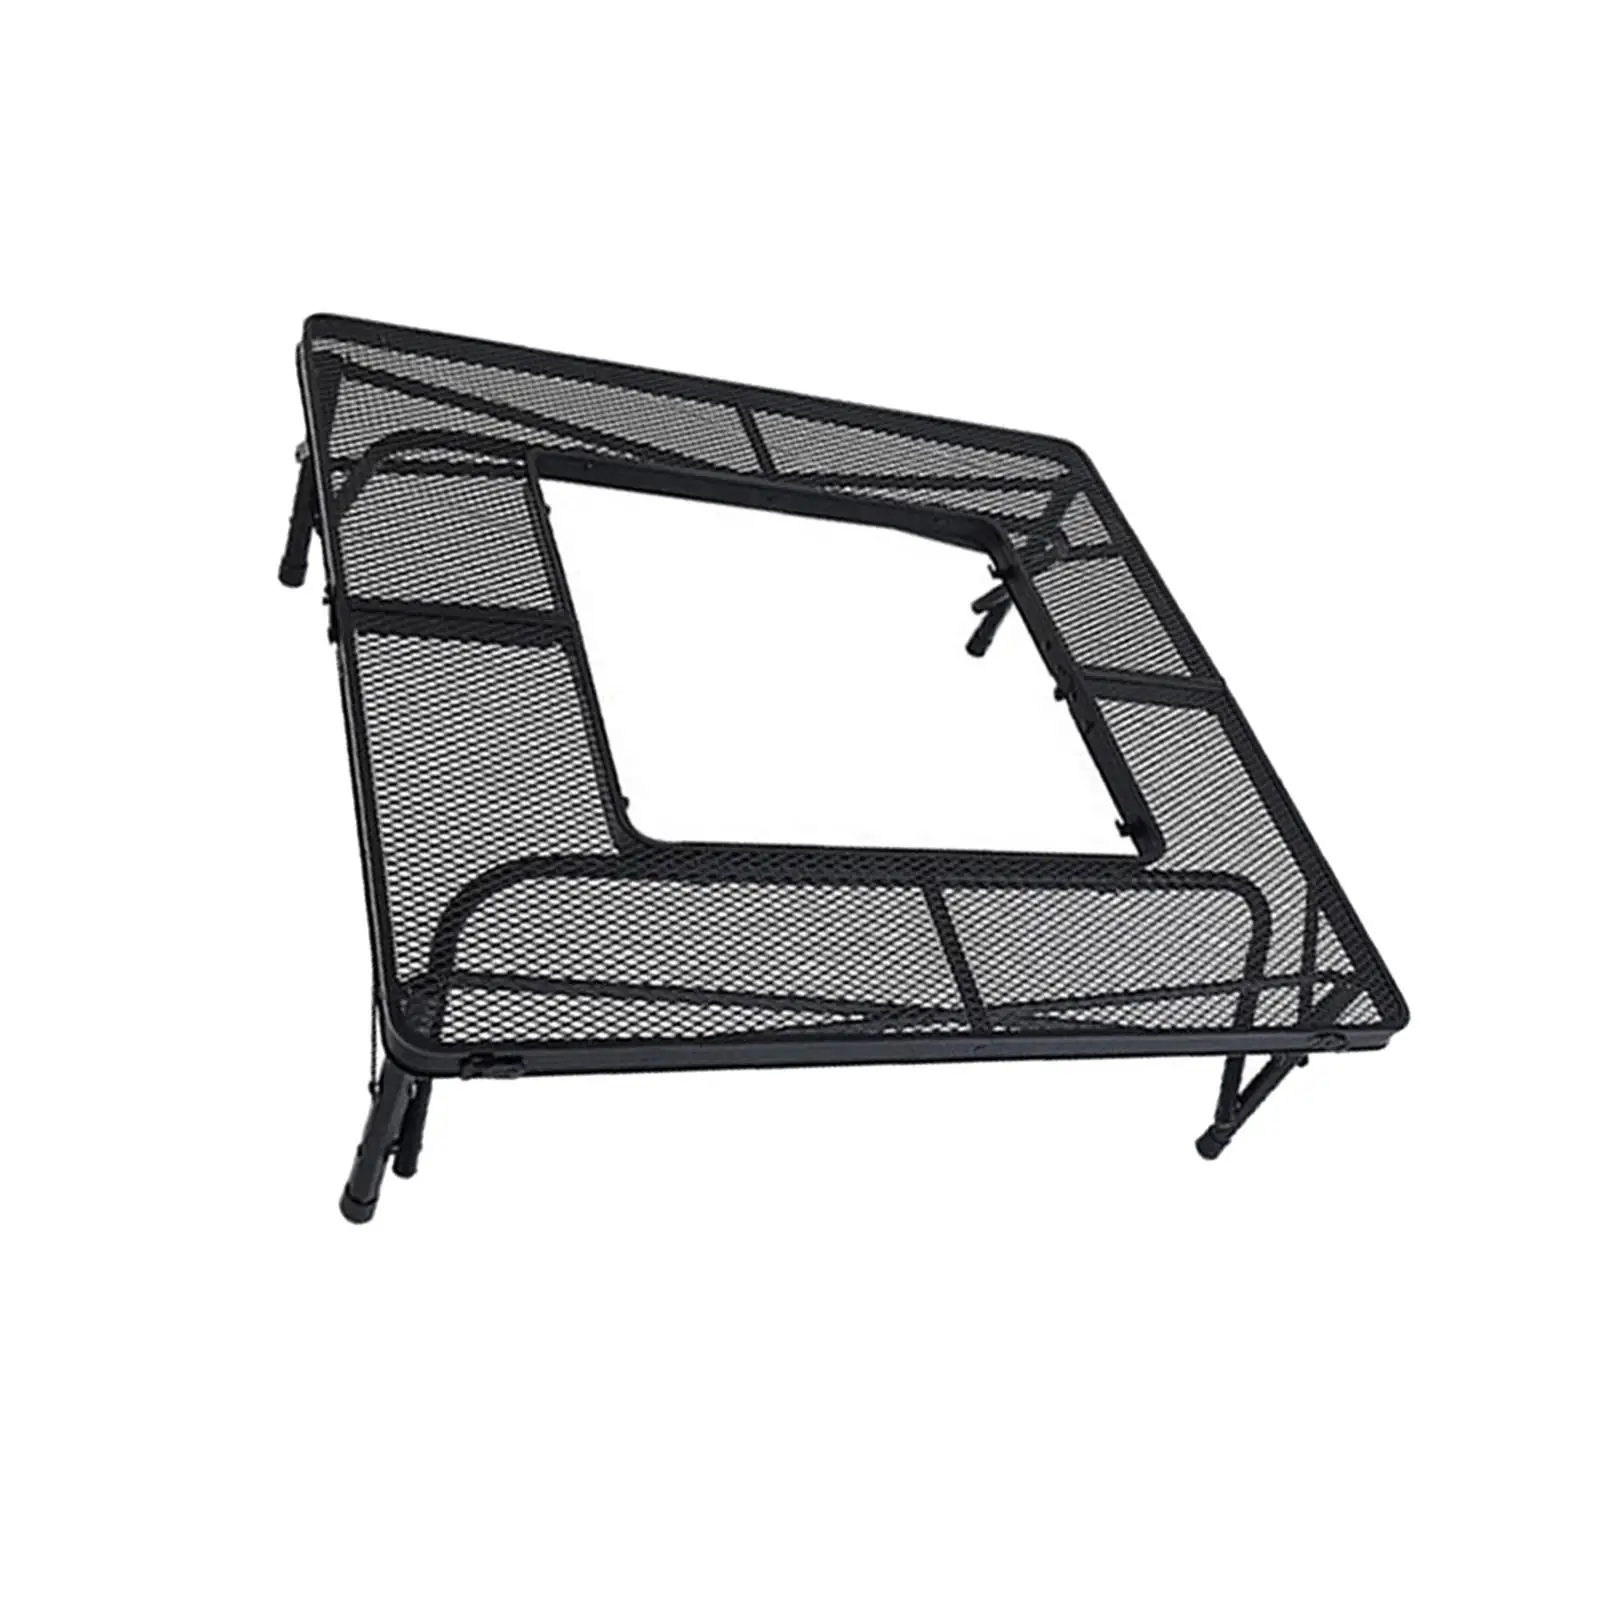 Outdoor Folding Table Multifunctional Camping Table Aluminum Alloy BBQ Grill Table for Backpacking Backyard Hiking Picnic Patio